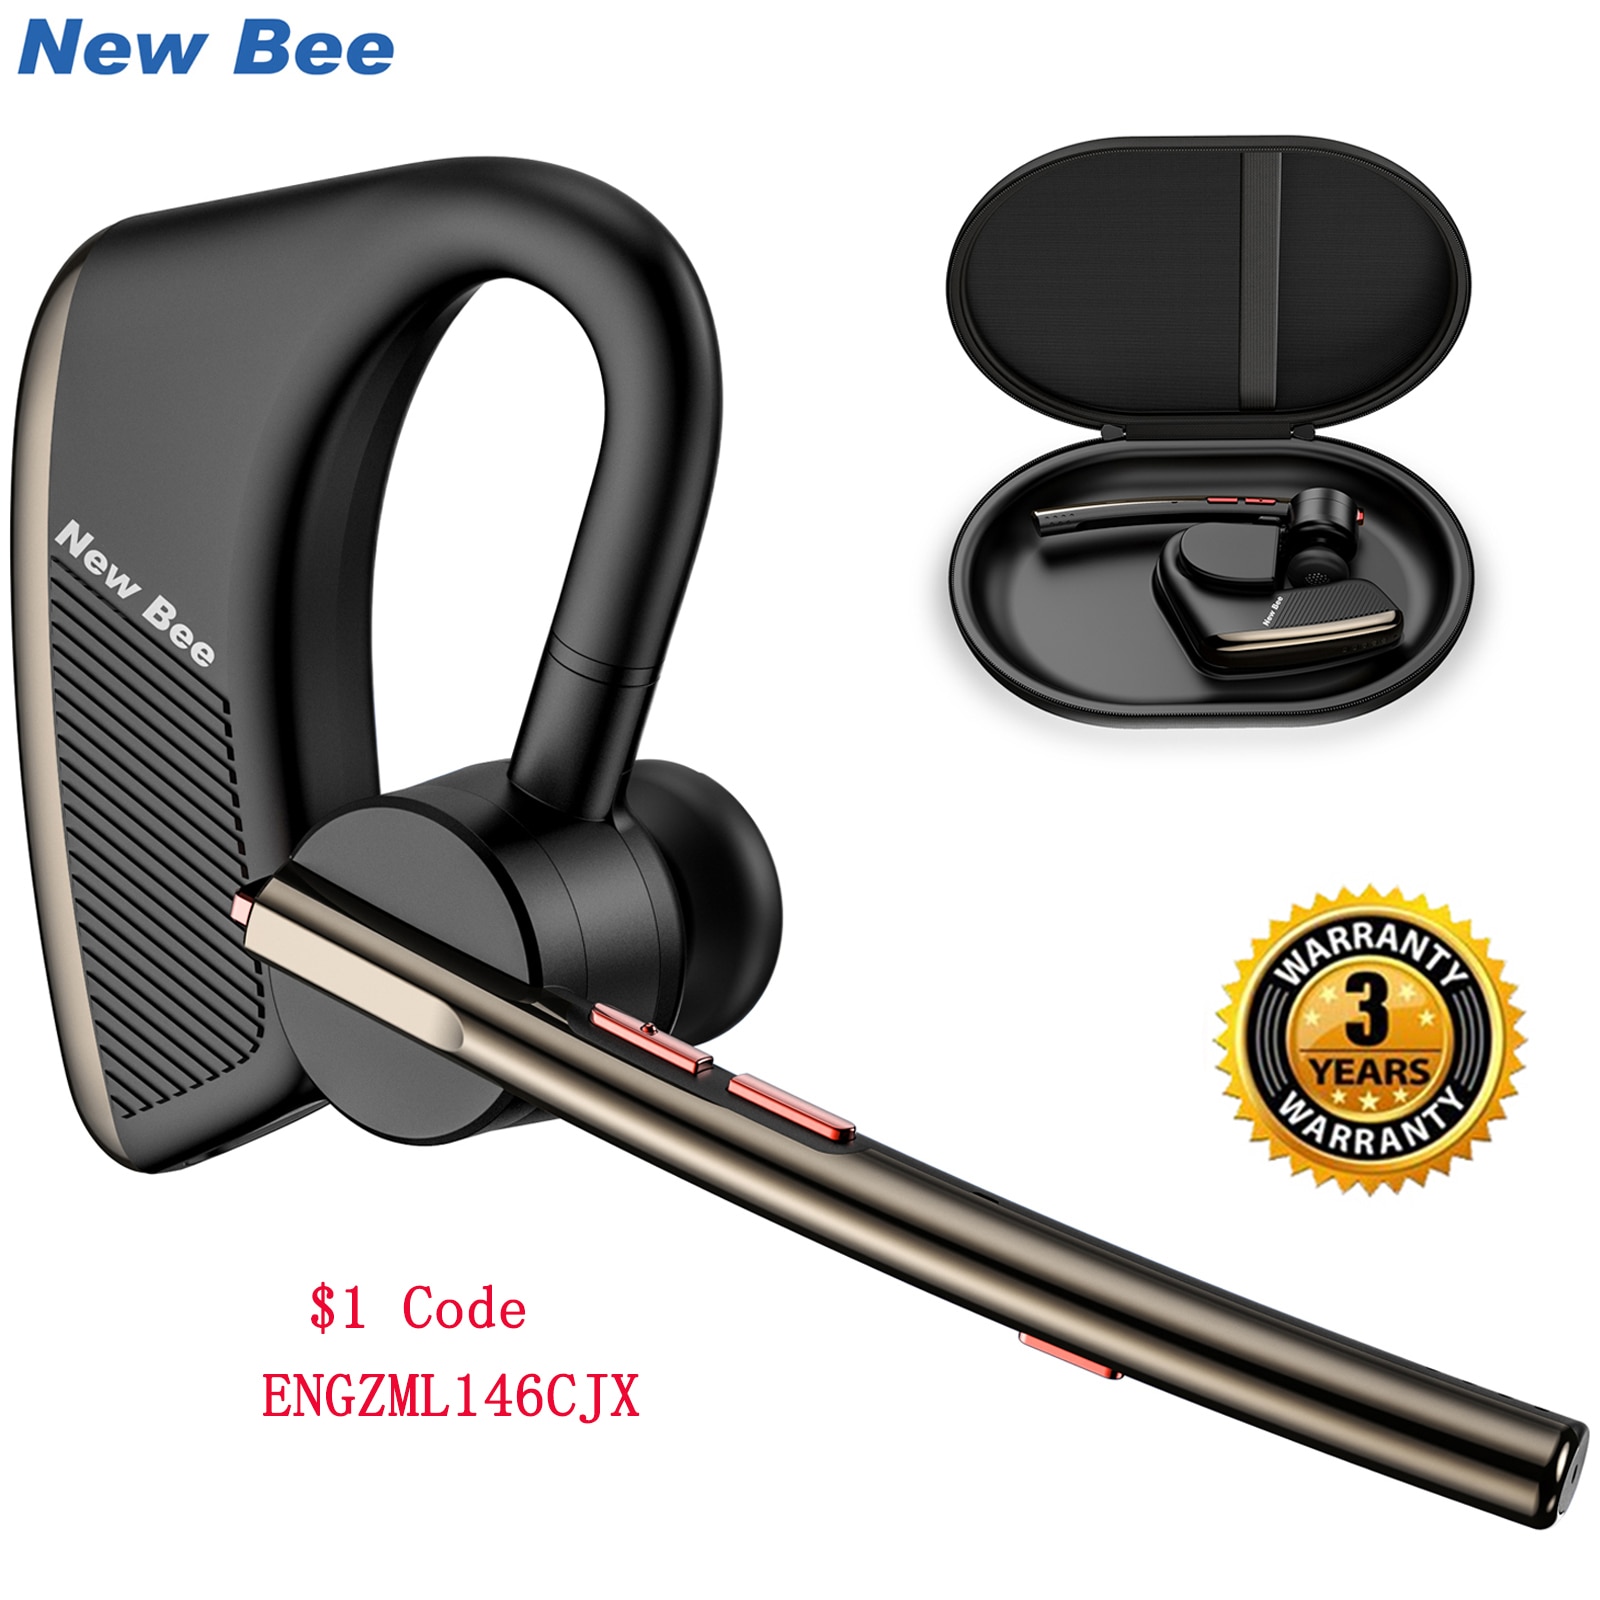 Wireless M50 Headphones with Noise Cancelling